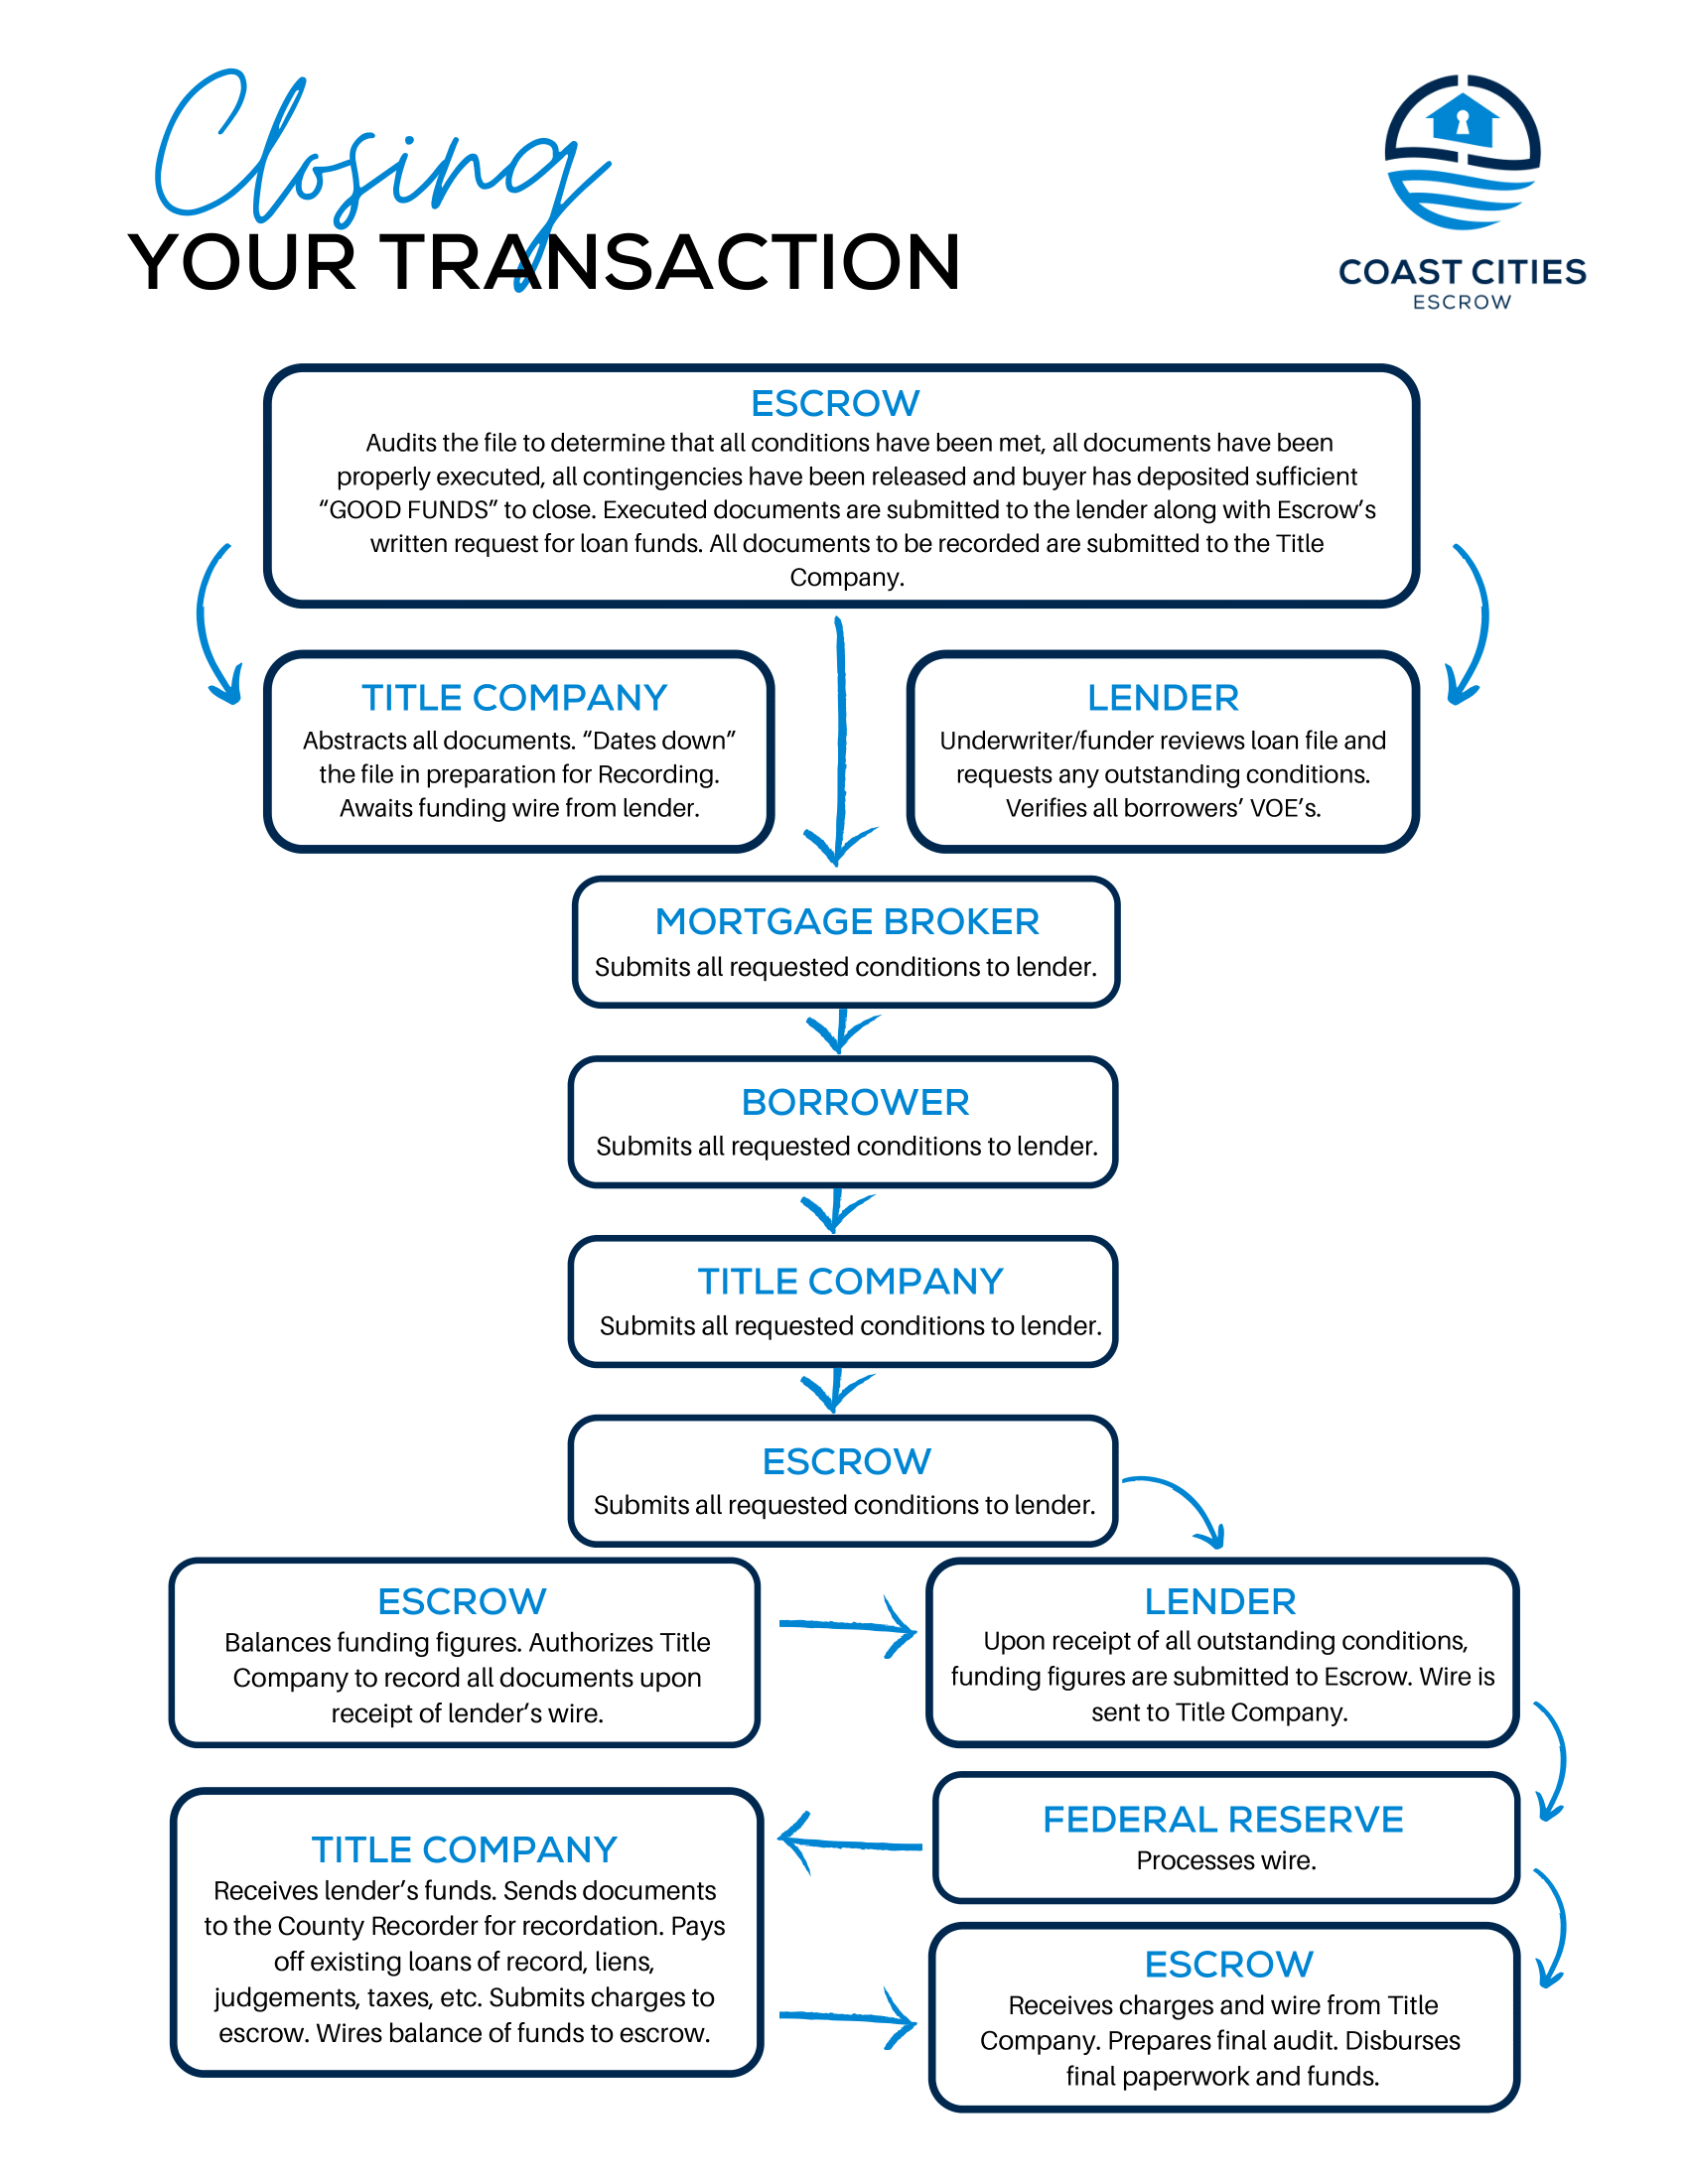 closing your transaction